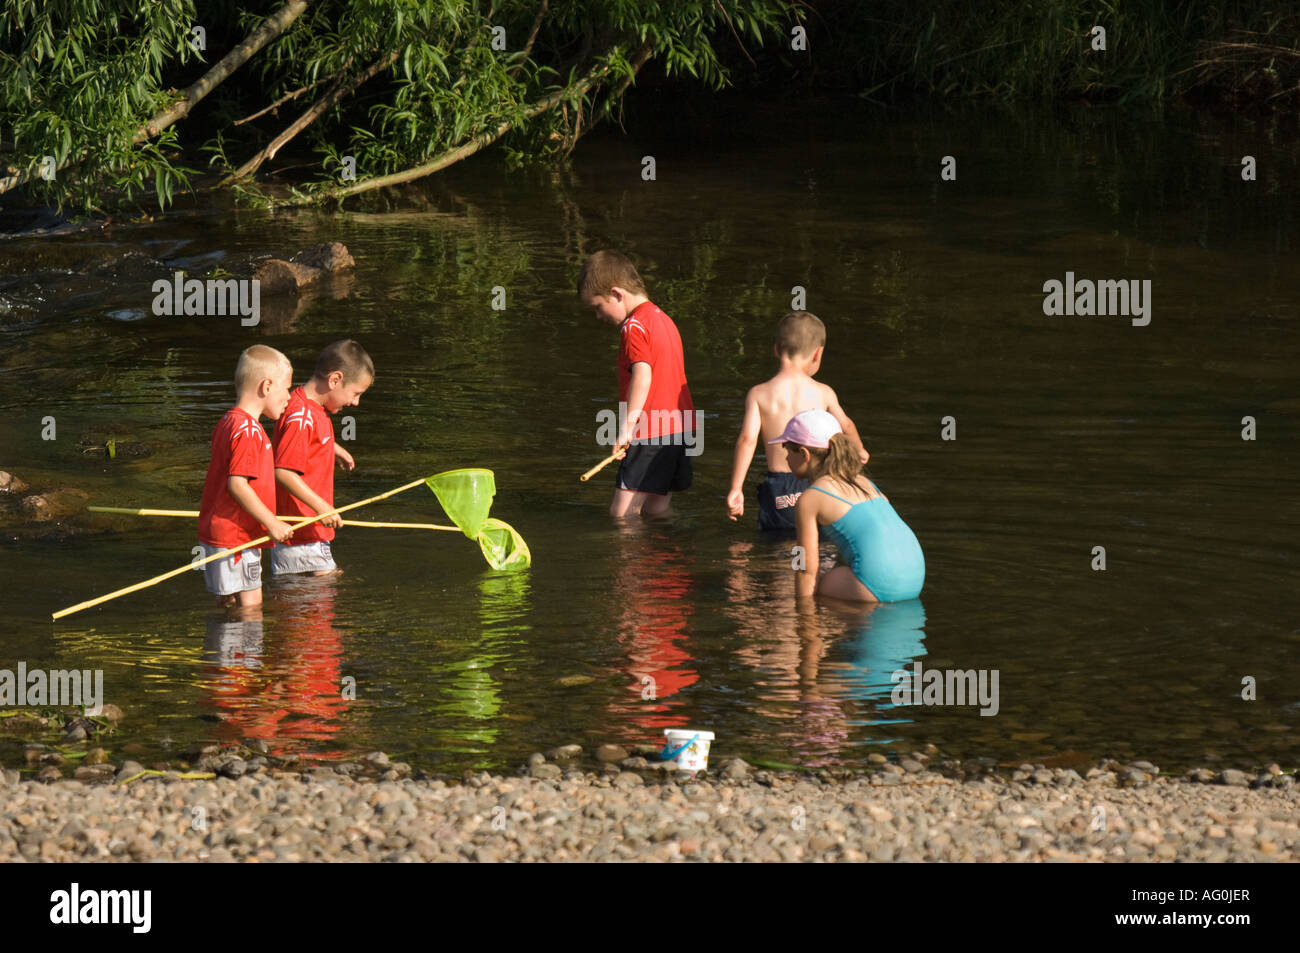 https://c8.alamy.com/comp/AG0JER/young-children-with-fishing-nets-paddling-in-river-at-denton-holme-AG0JER.jpg